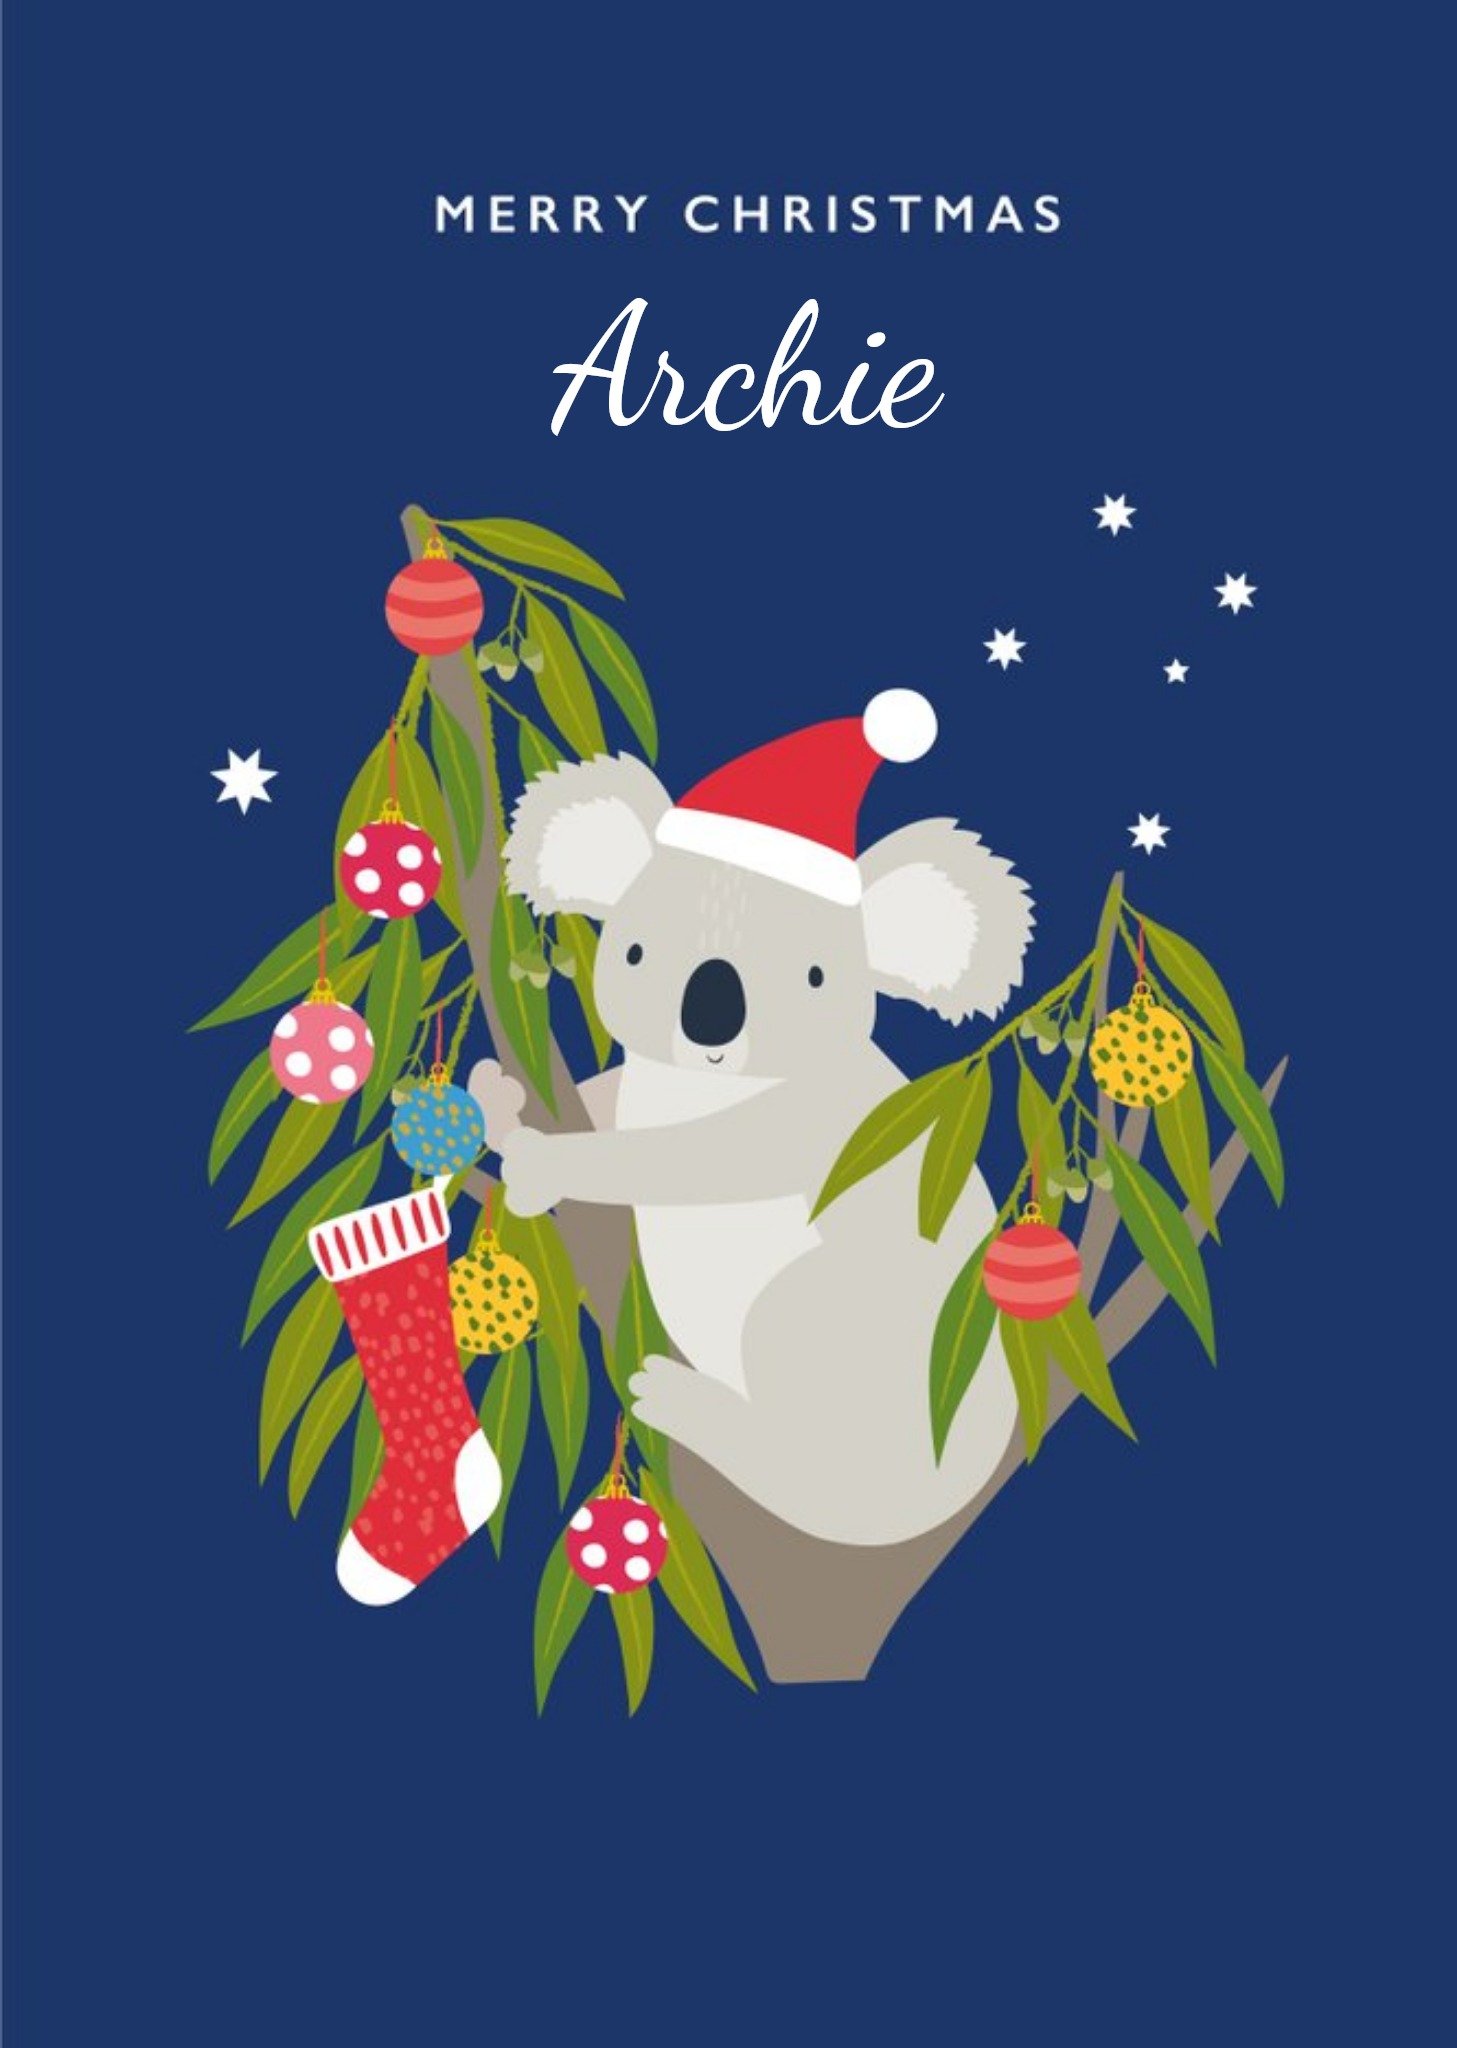 Moonpig Cute Illustration Of A Koala Perched In A Tree With Decorations Christmas Card Ecard